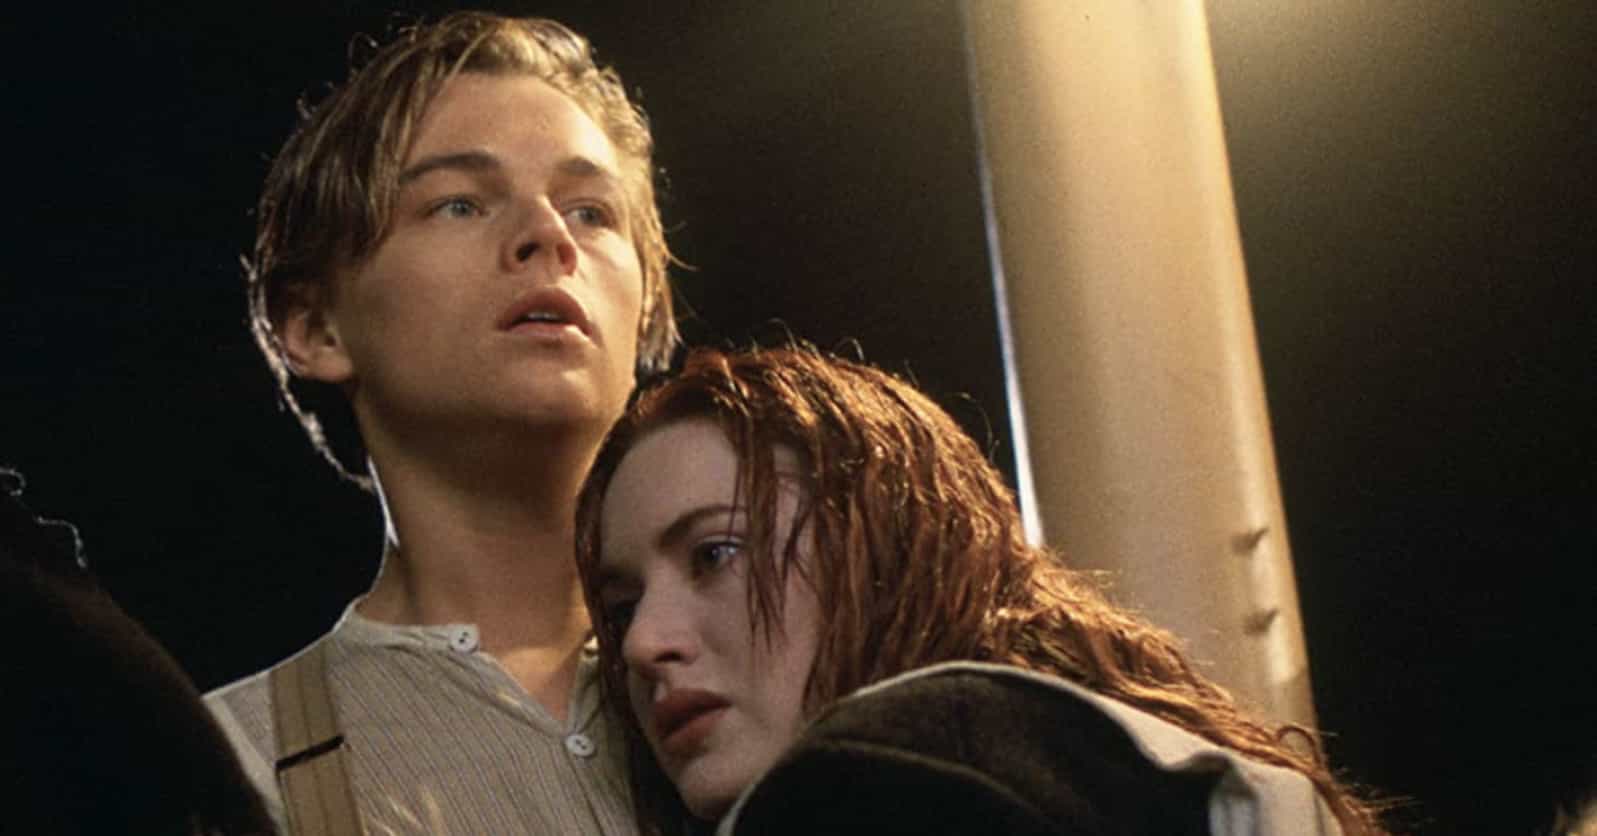 The 'Titanic' Cast Vs. The Real People They Portrayed